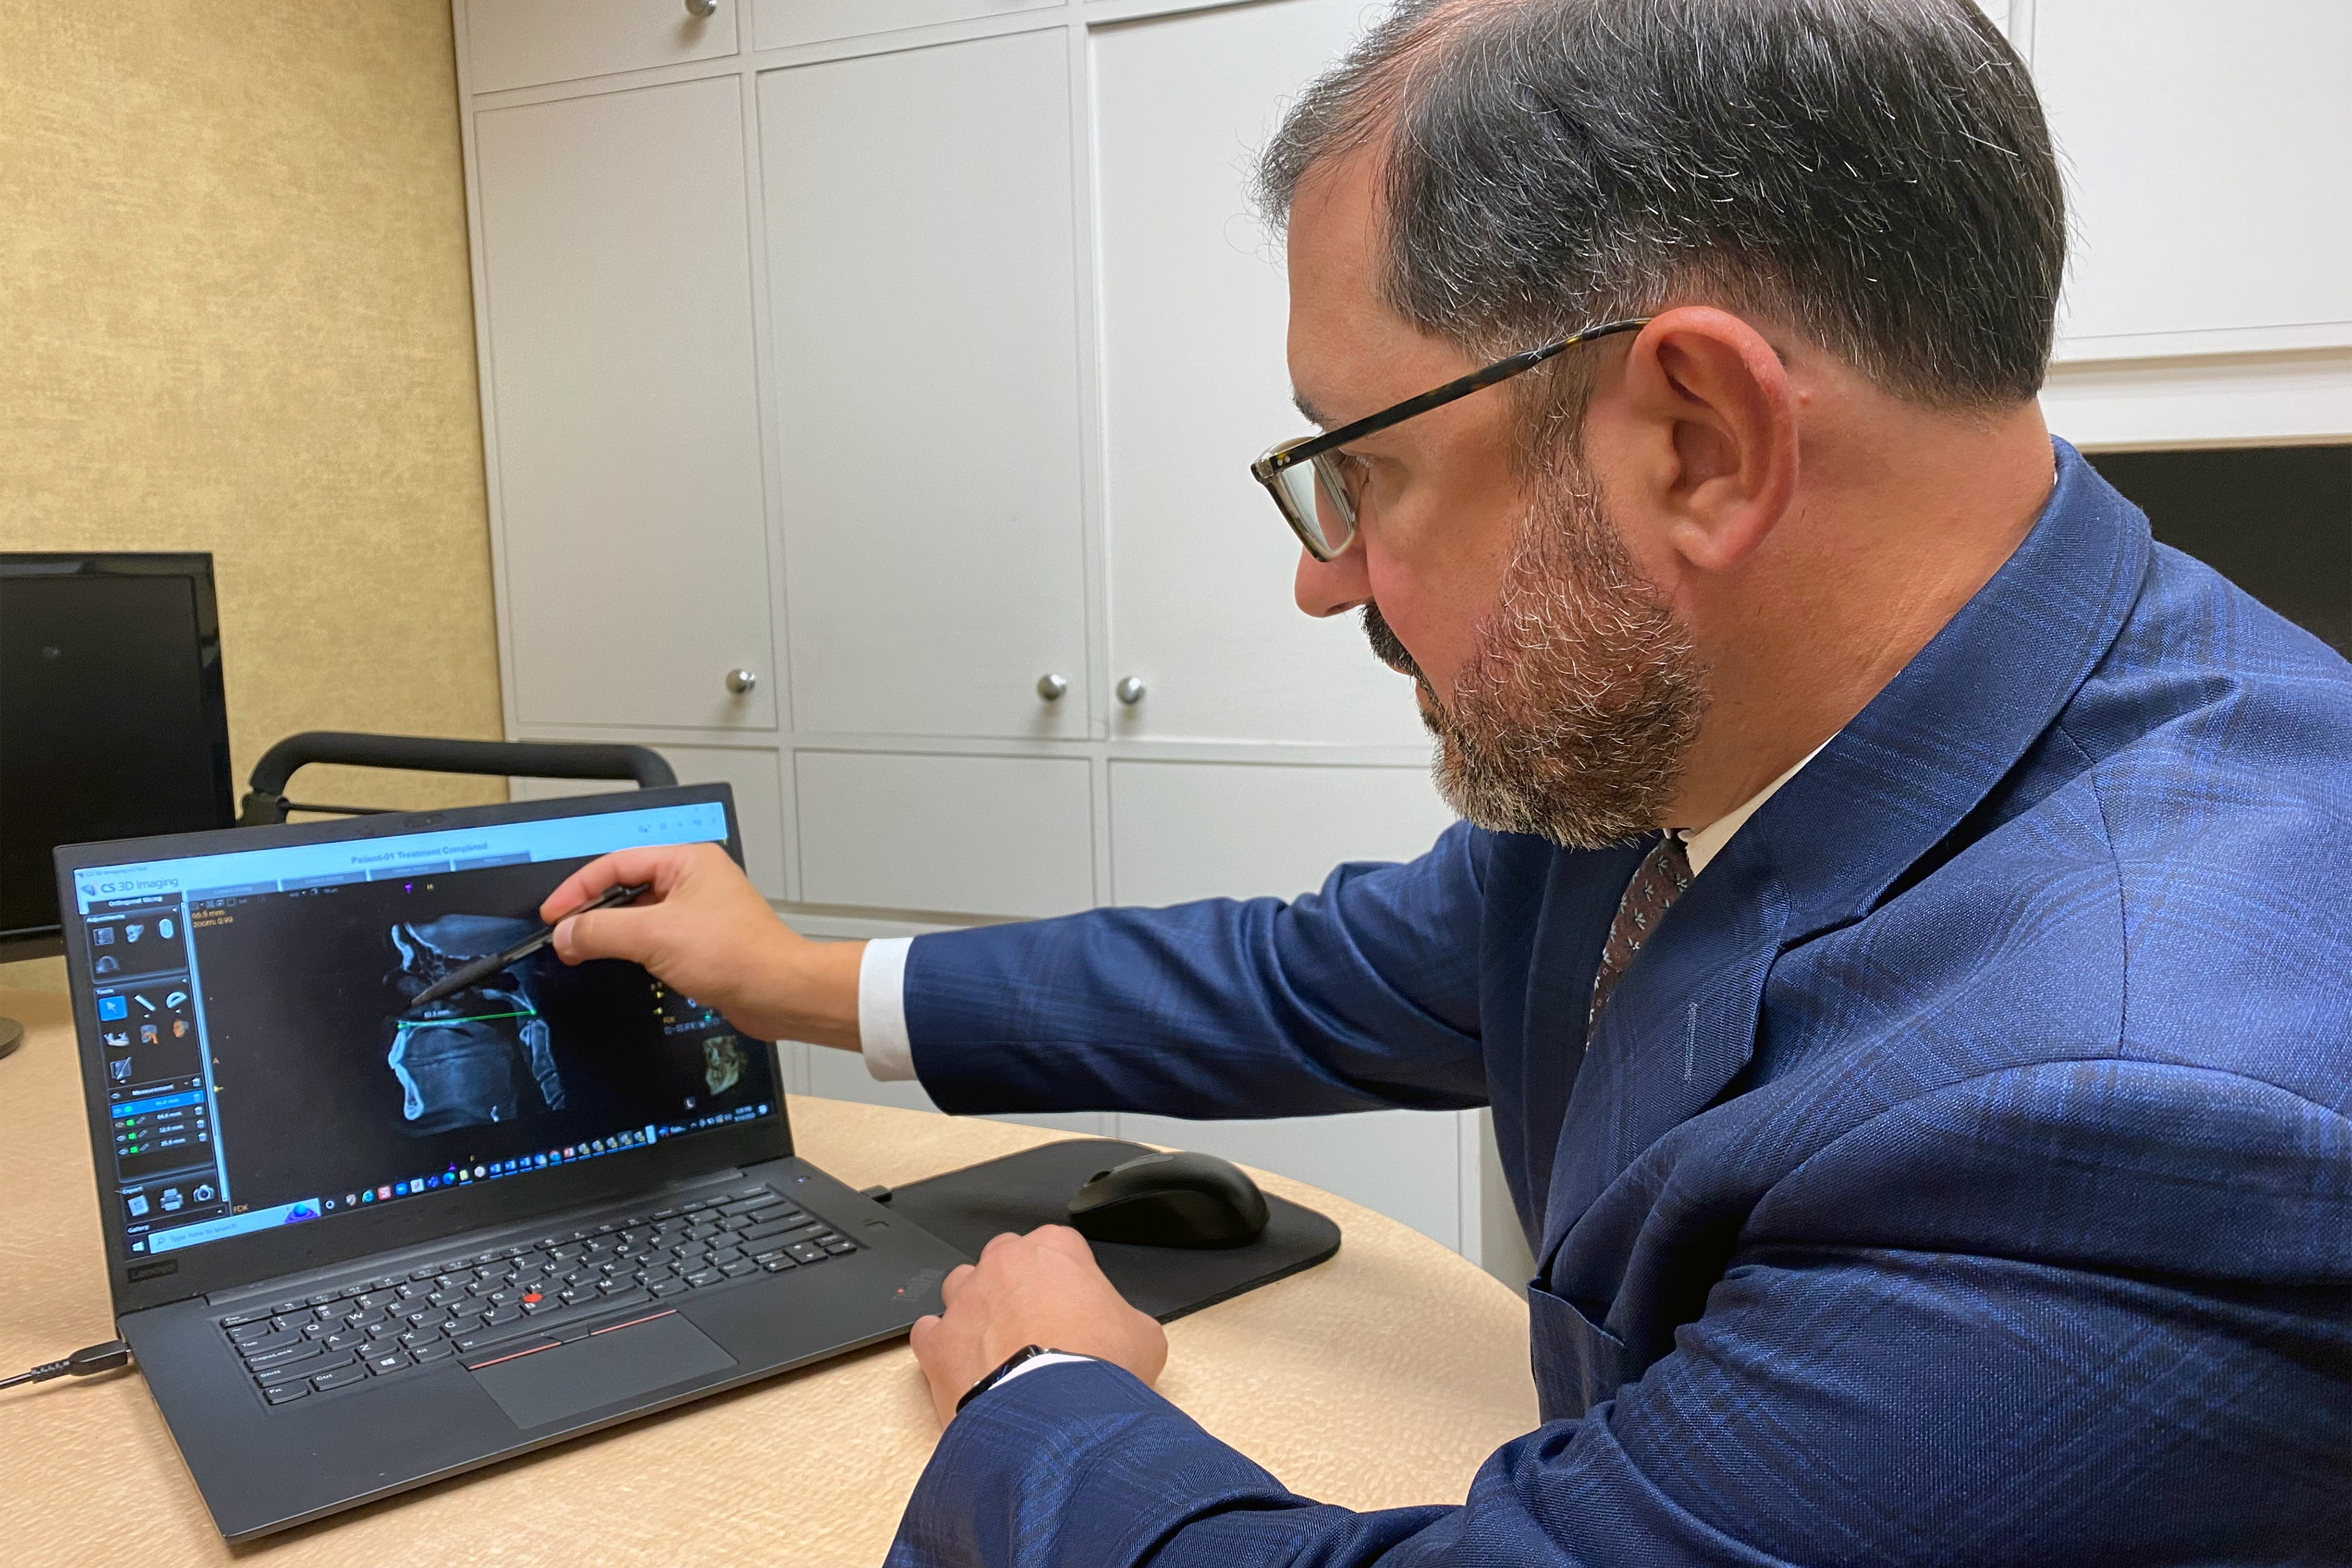 A photo shows a male dental professional pointing to an image of a dental scan on a laptop screen.